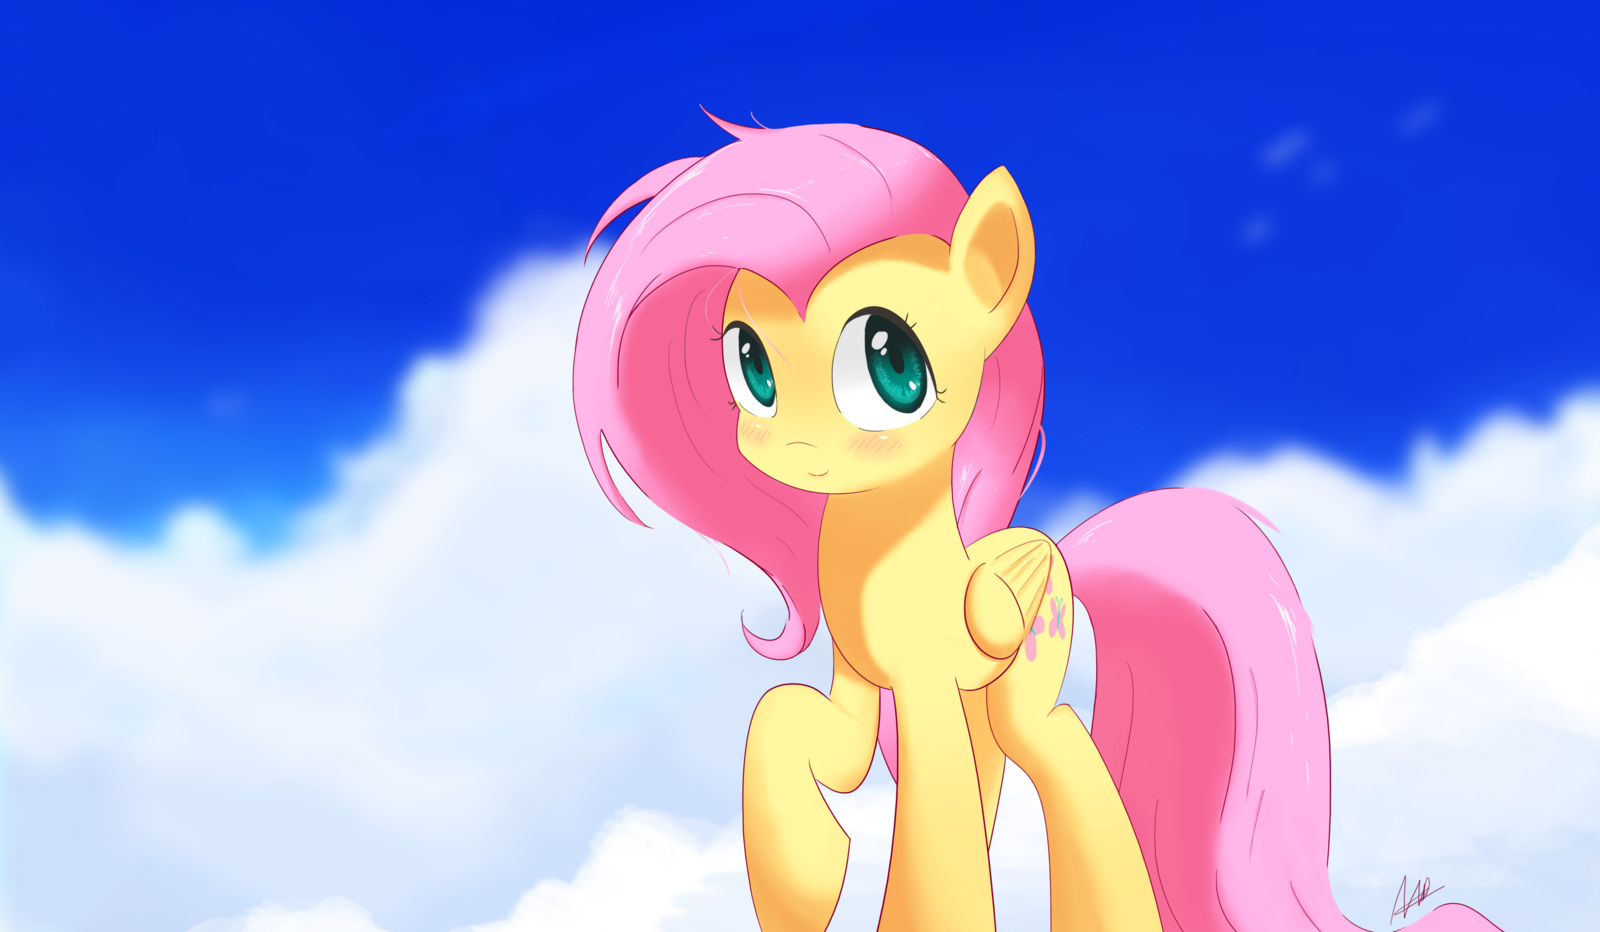 fluttershy_by_repoisn-d7jeefr.png